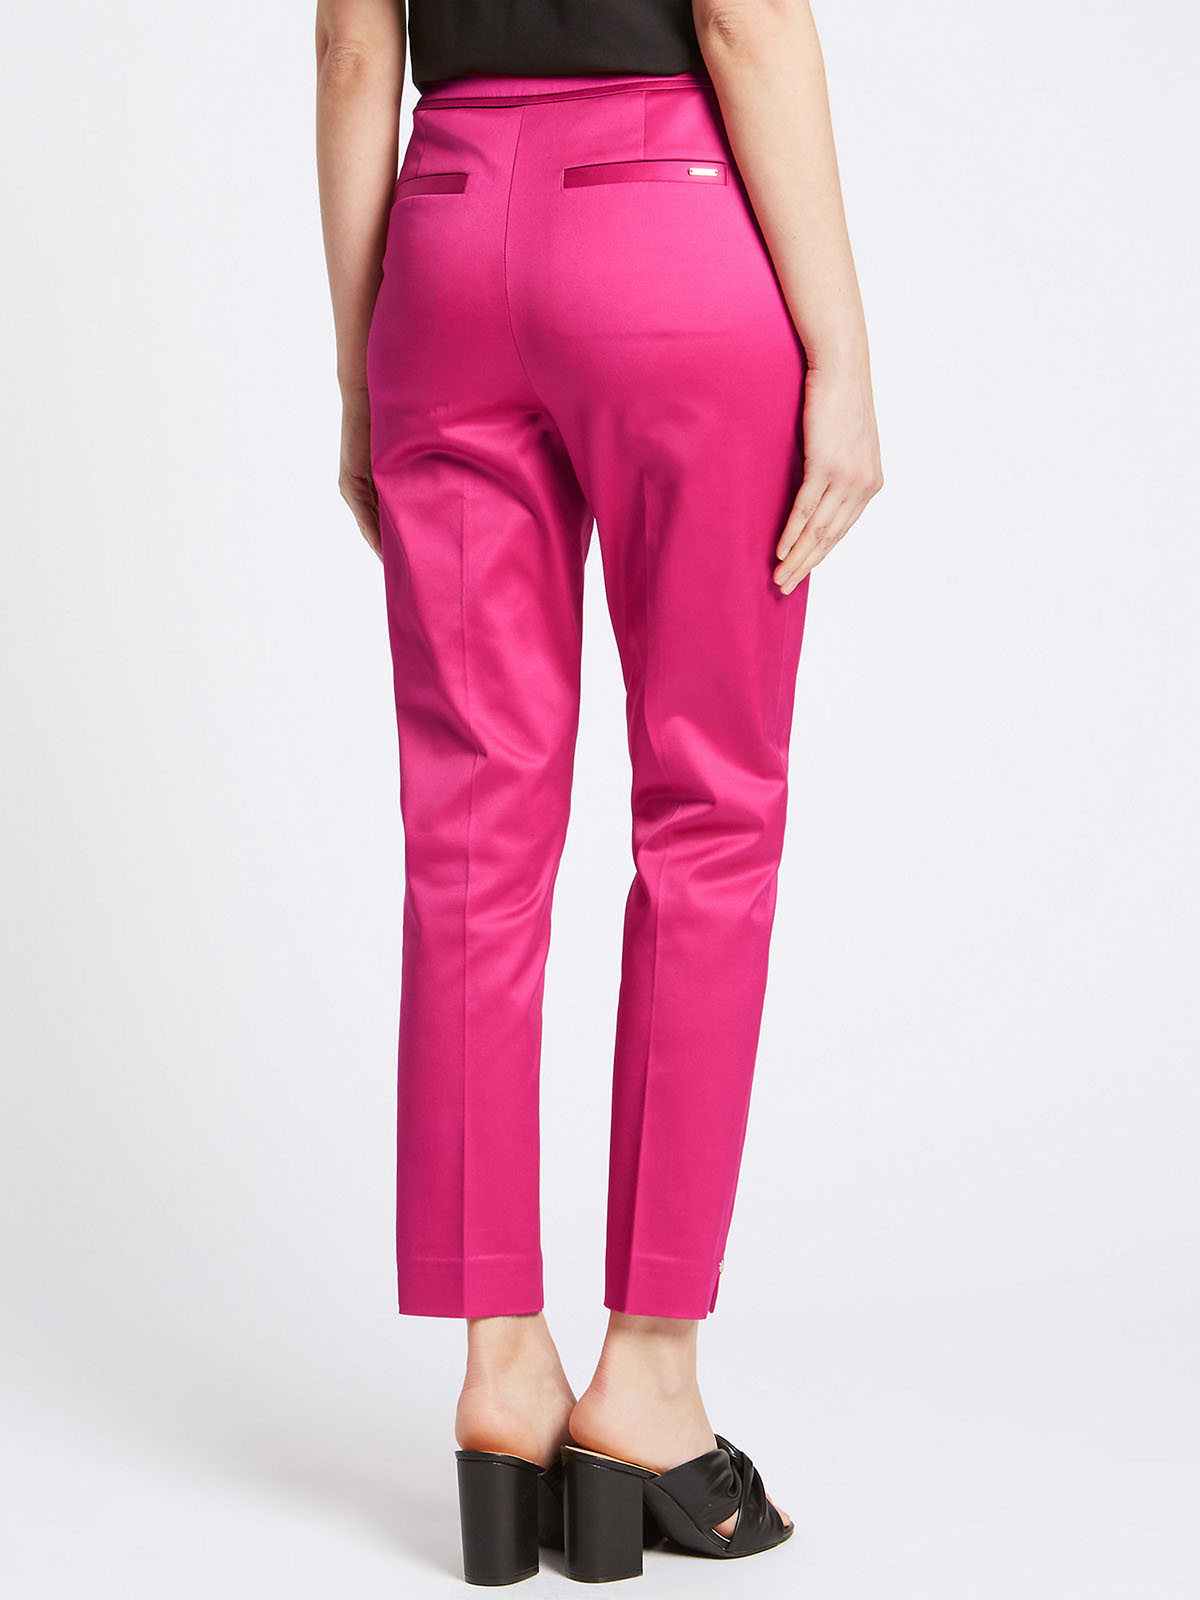 Marks and Spencer - - M&5 BRIGHT-PINK Cotton Rich Slim Leg Ankle Grazer ...